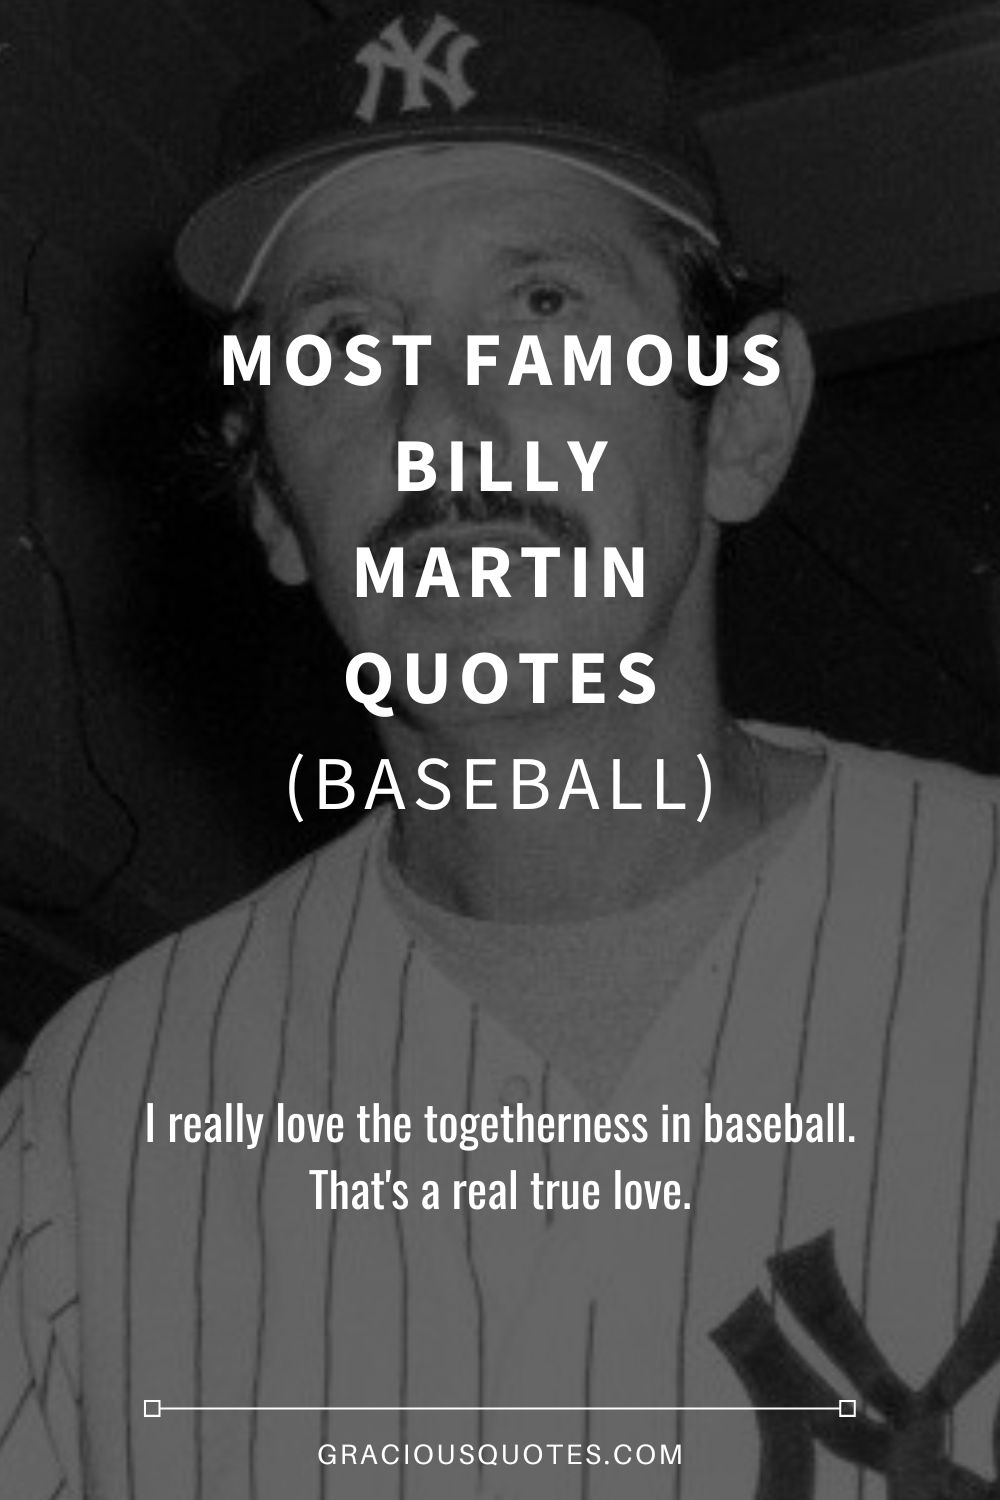 Most Famous Billy Martin Quotes (BASEBALL) - Gracious Quotes